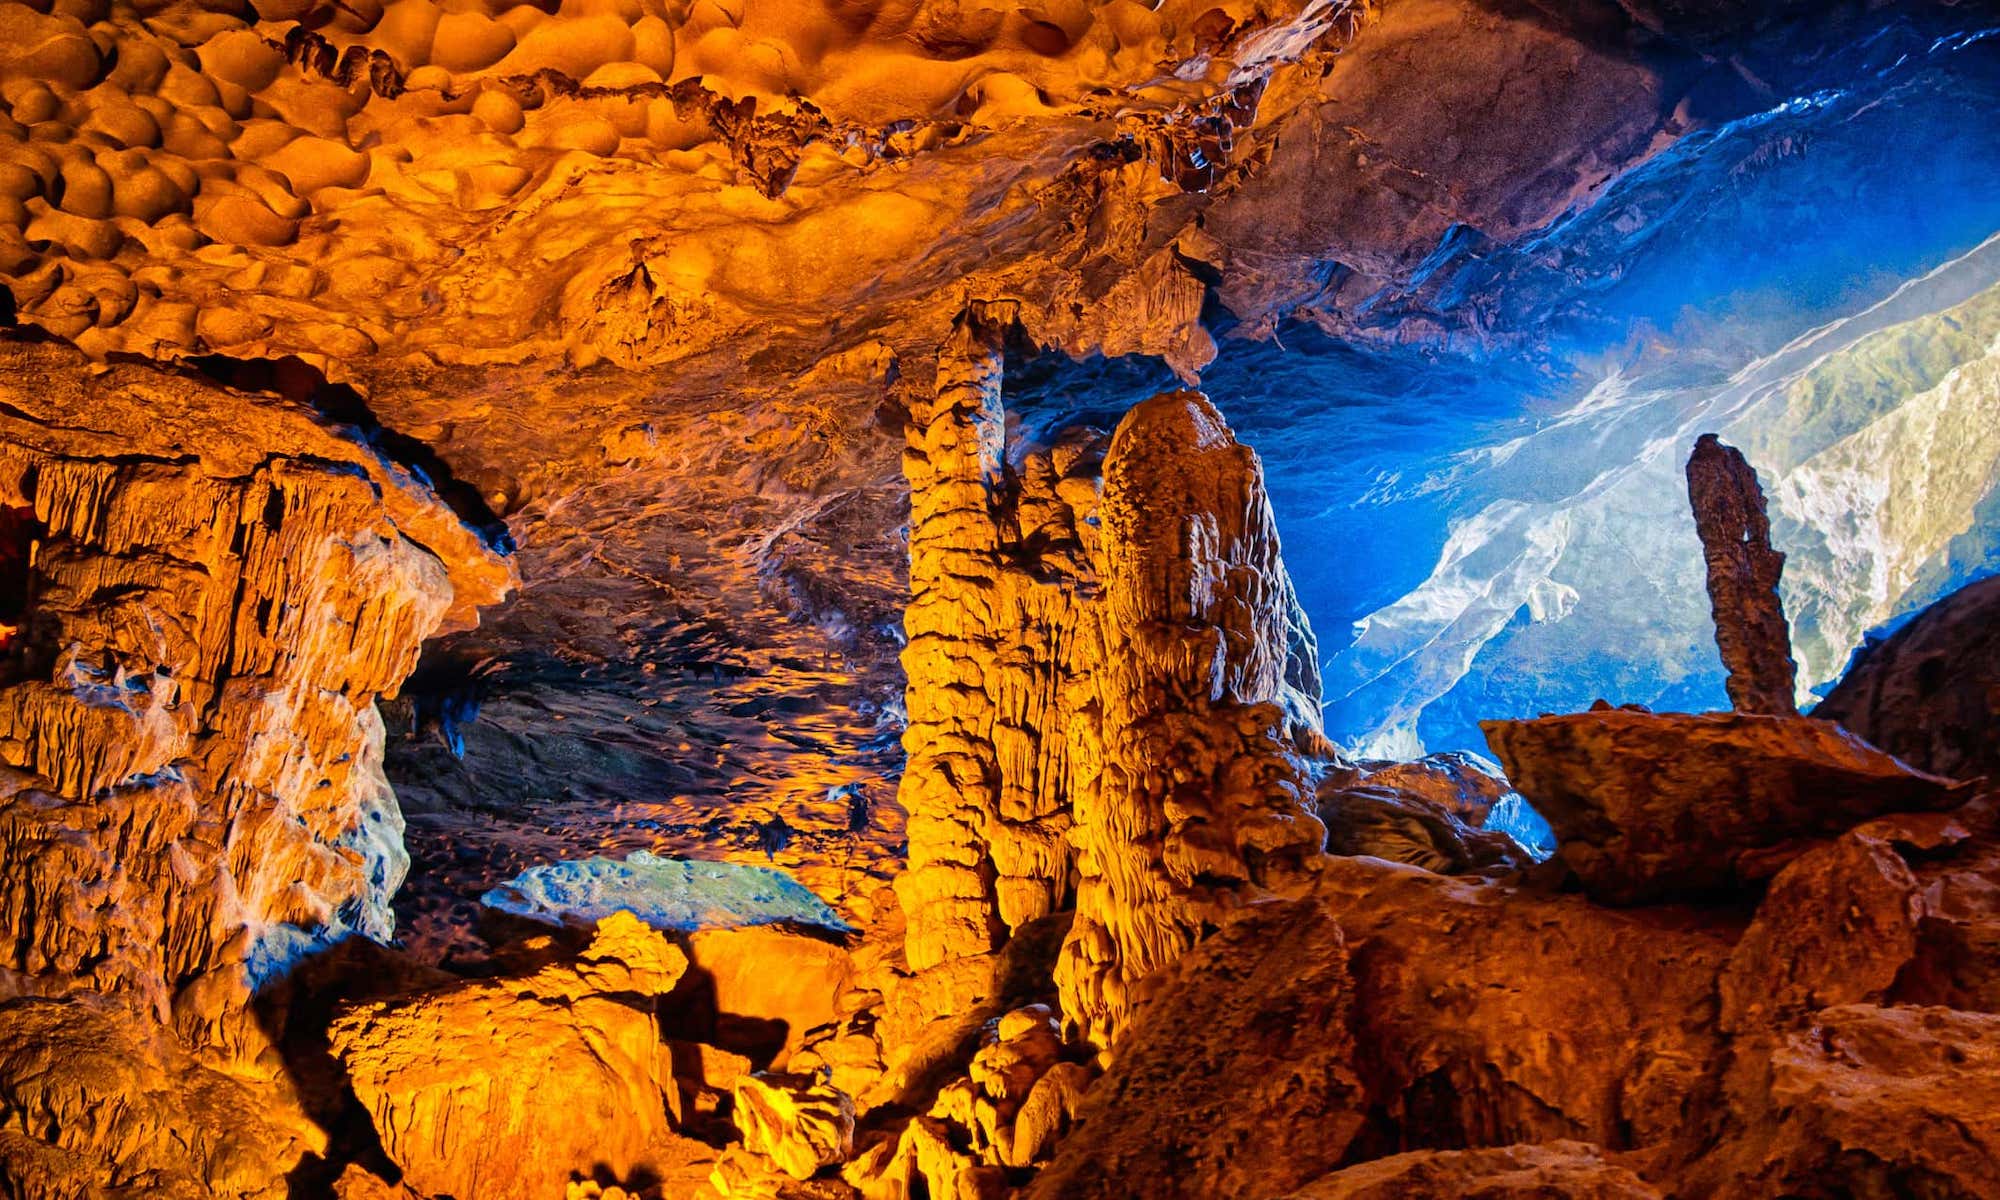 Explore cave in Halong Bay